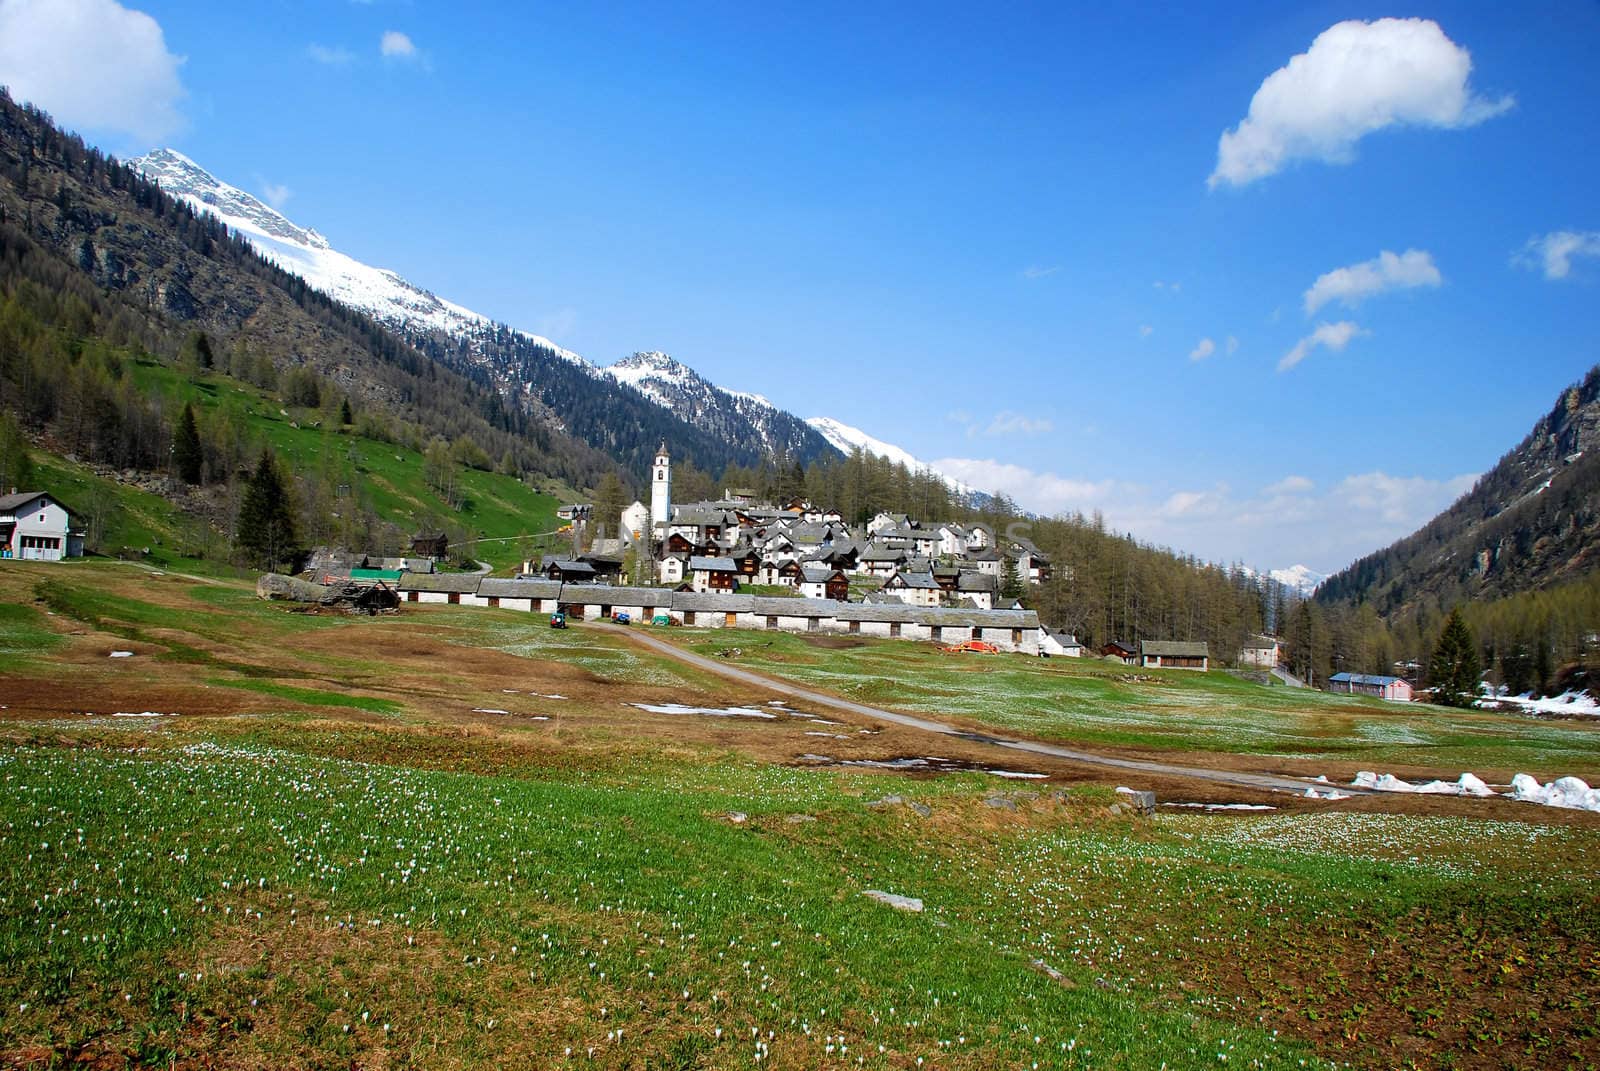 Bosco Gurin retains the charm of one of the most charming mountain villages of Switzerland. The picturesque town, founded in 1253 by settlers Walser actually looks beautiful and intact with its distinctive stone houses and wood, springtime